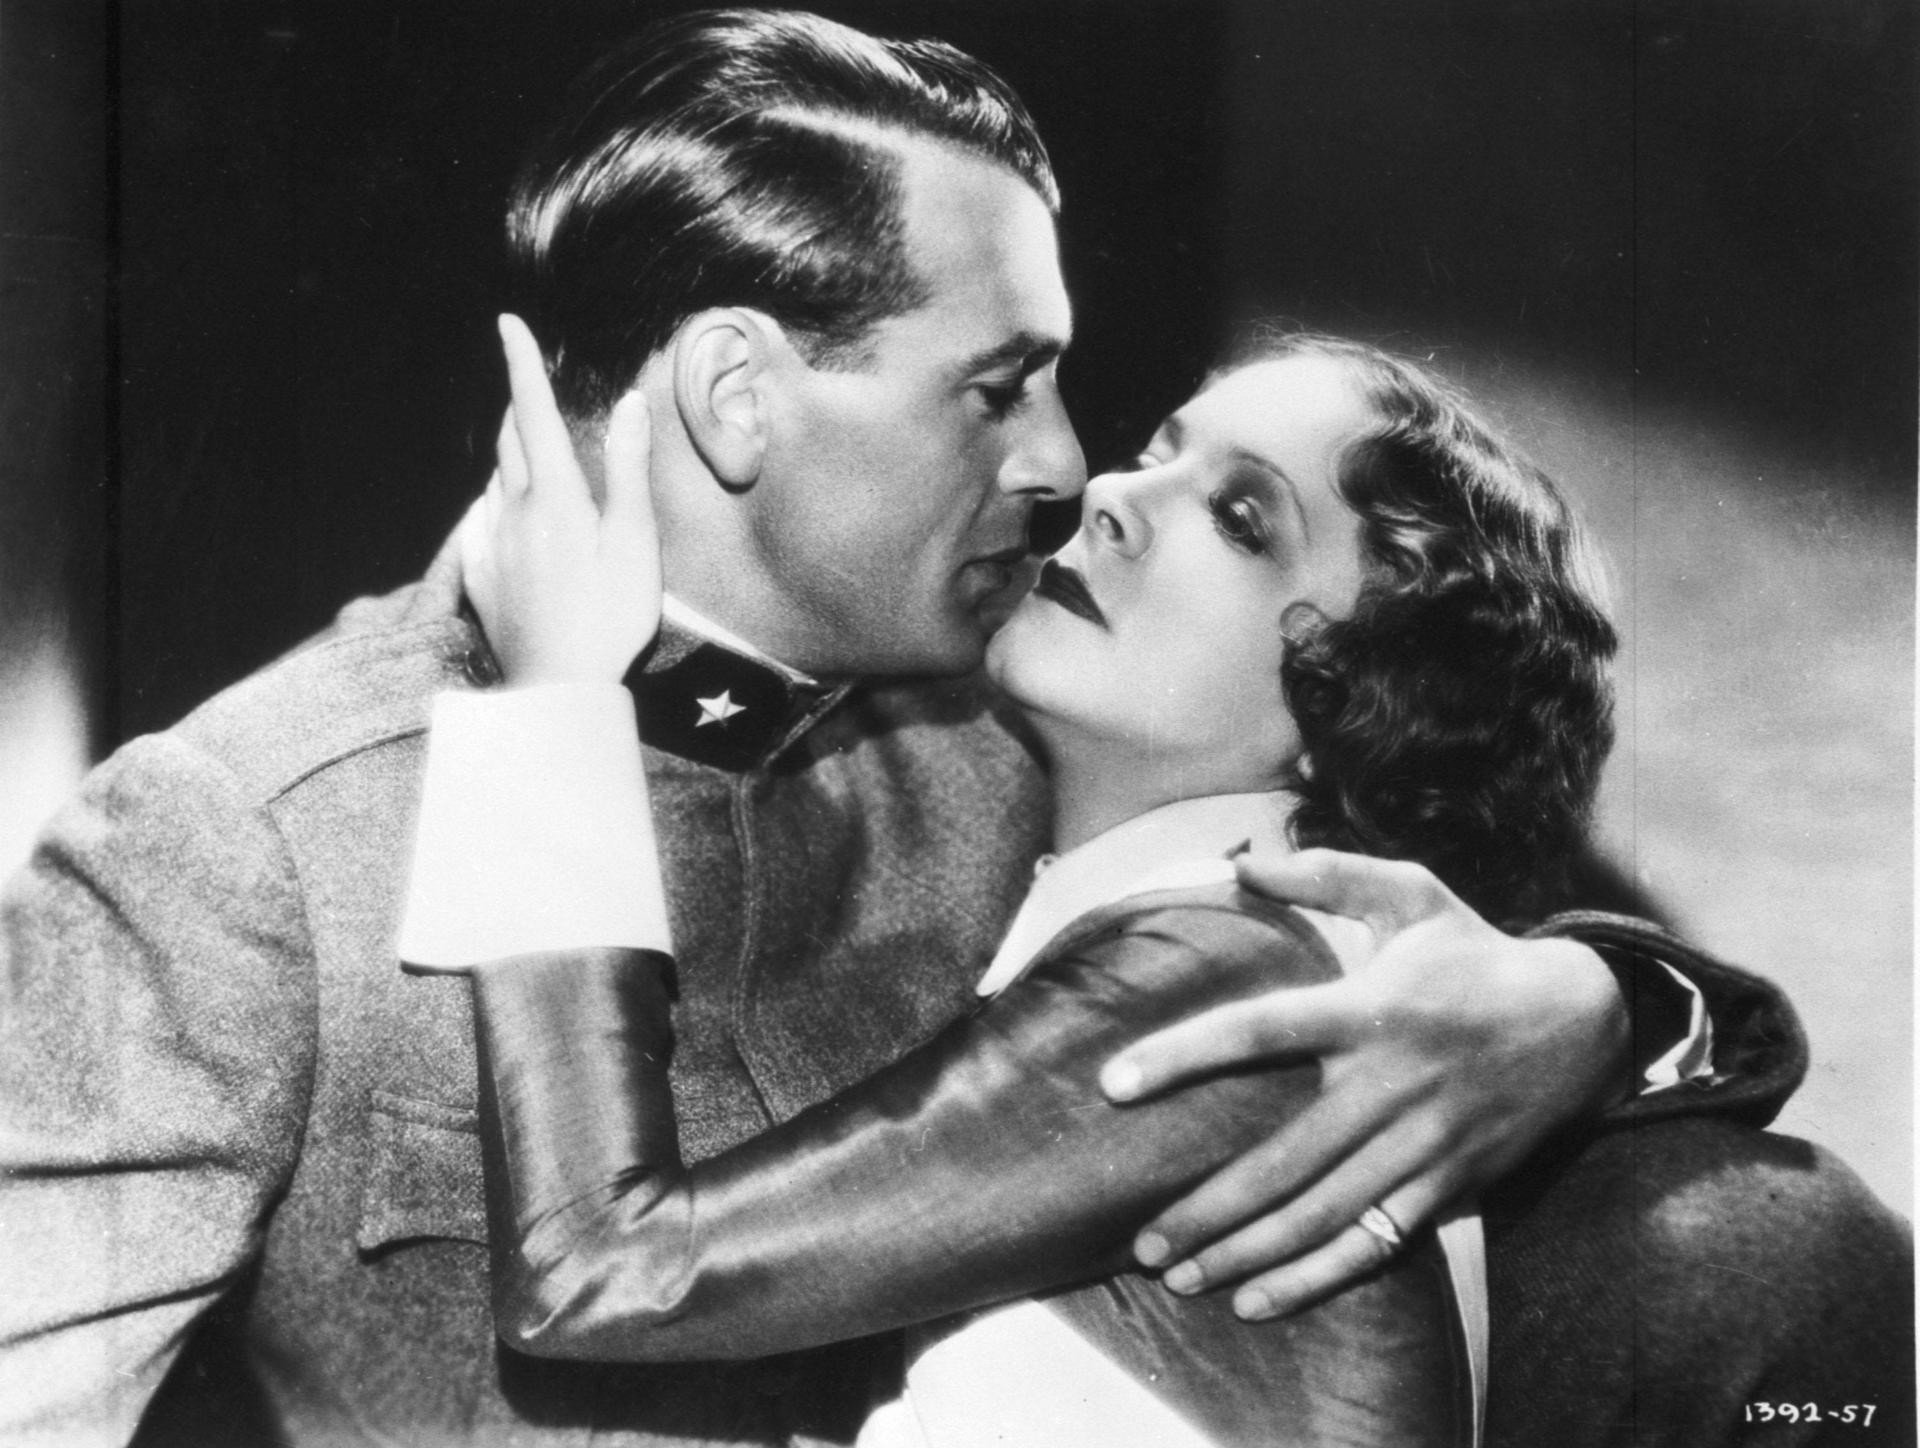 Gary Cooper and Helen Hayes in “A Farewell to Arms” (dir. Frank Borzage, 1932)